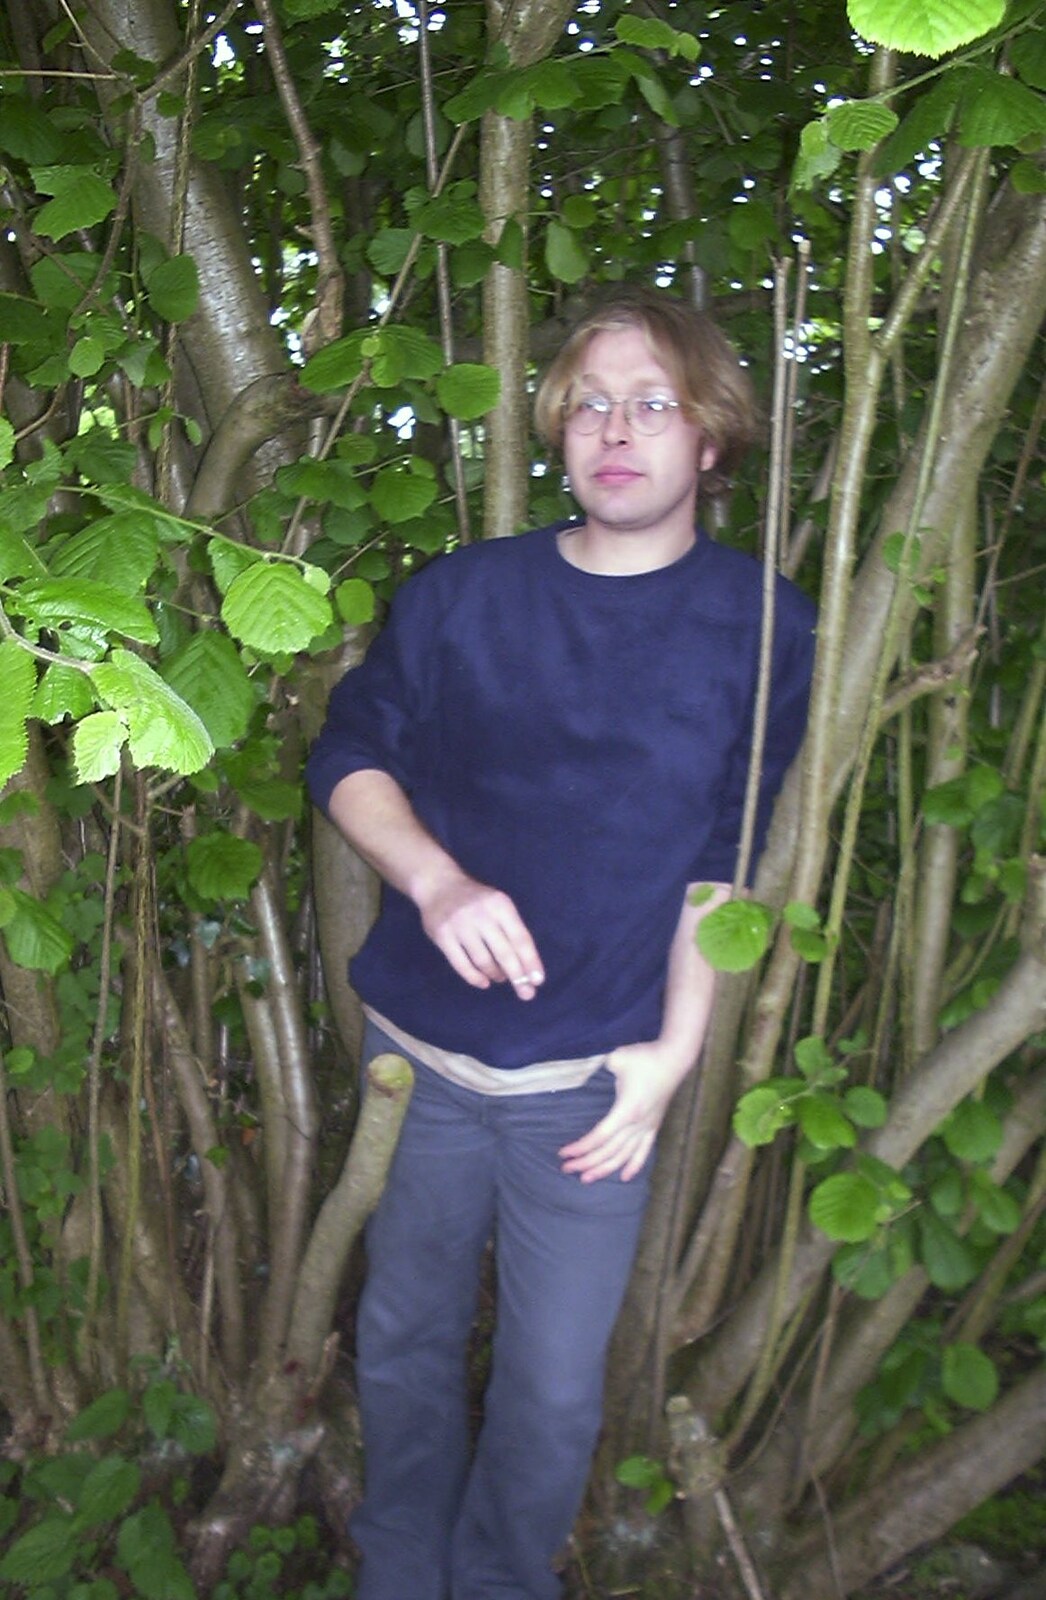 A Rainy Barbeque at the Swan Inn, Brome, Suffolk - 15th June 2002: Marc takes it easy in the trees